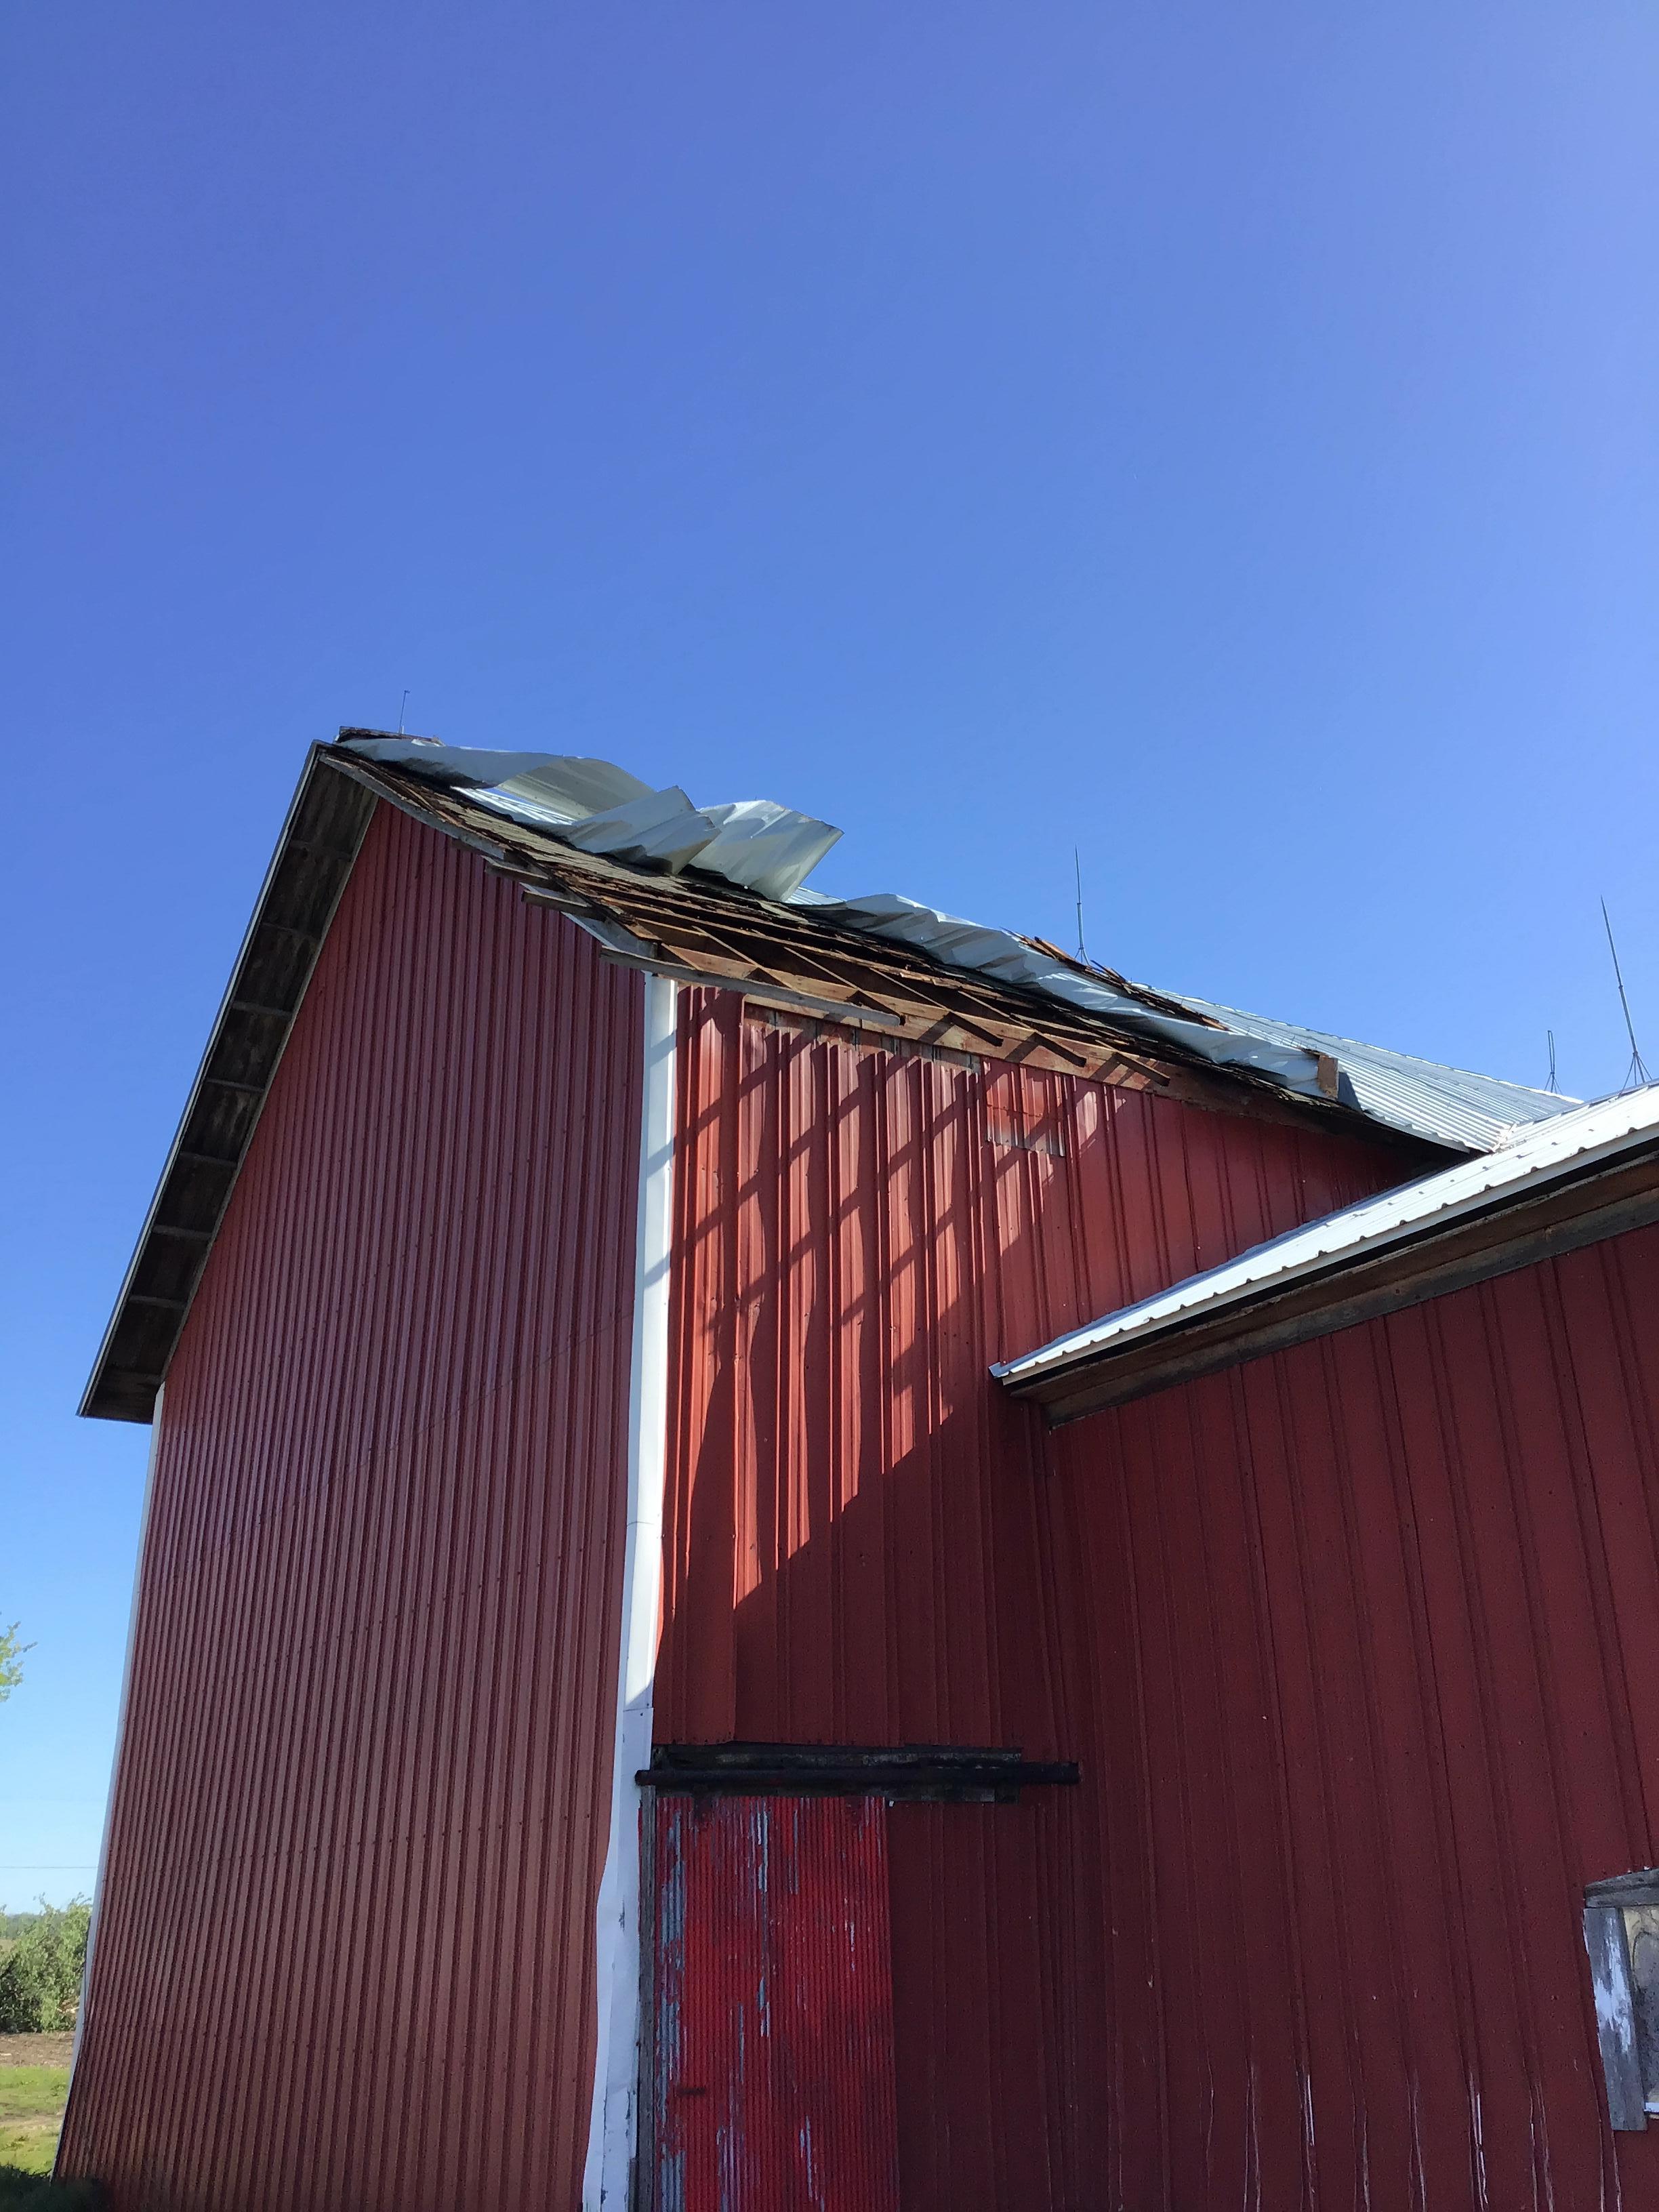 Photo of metal roof paneling peeled off top of barn